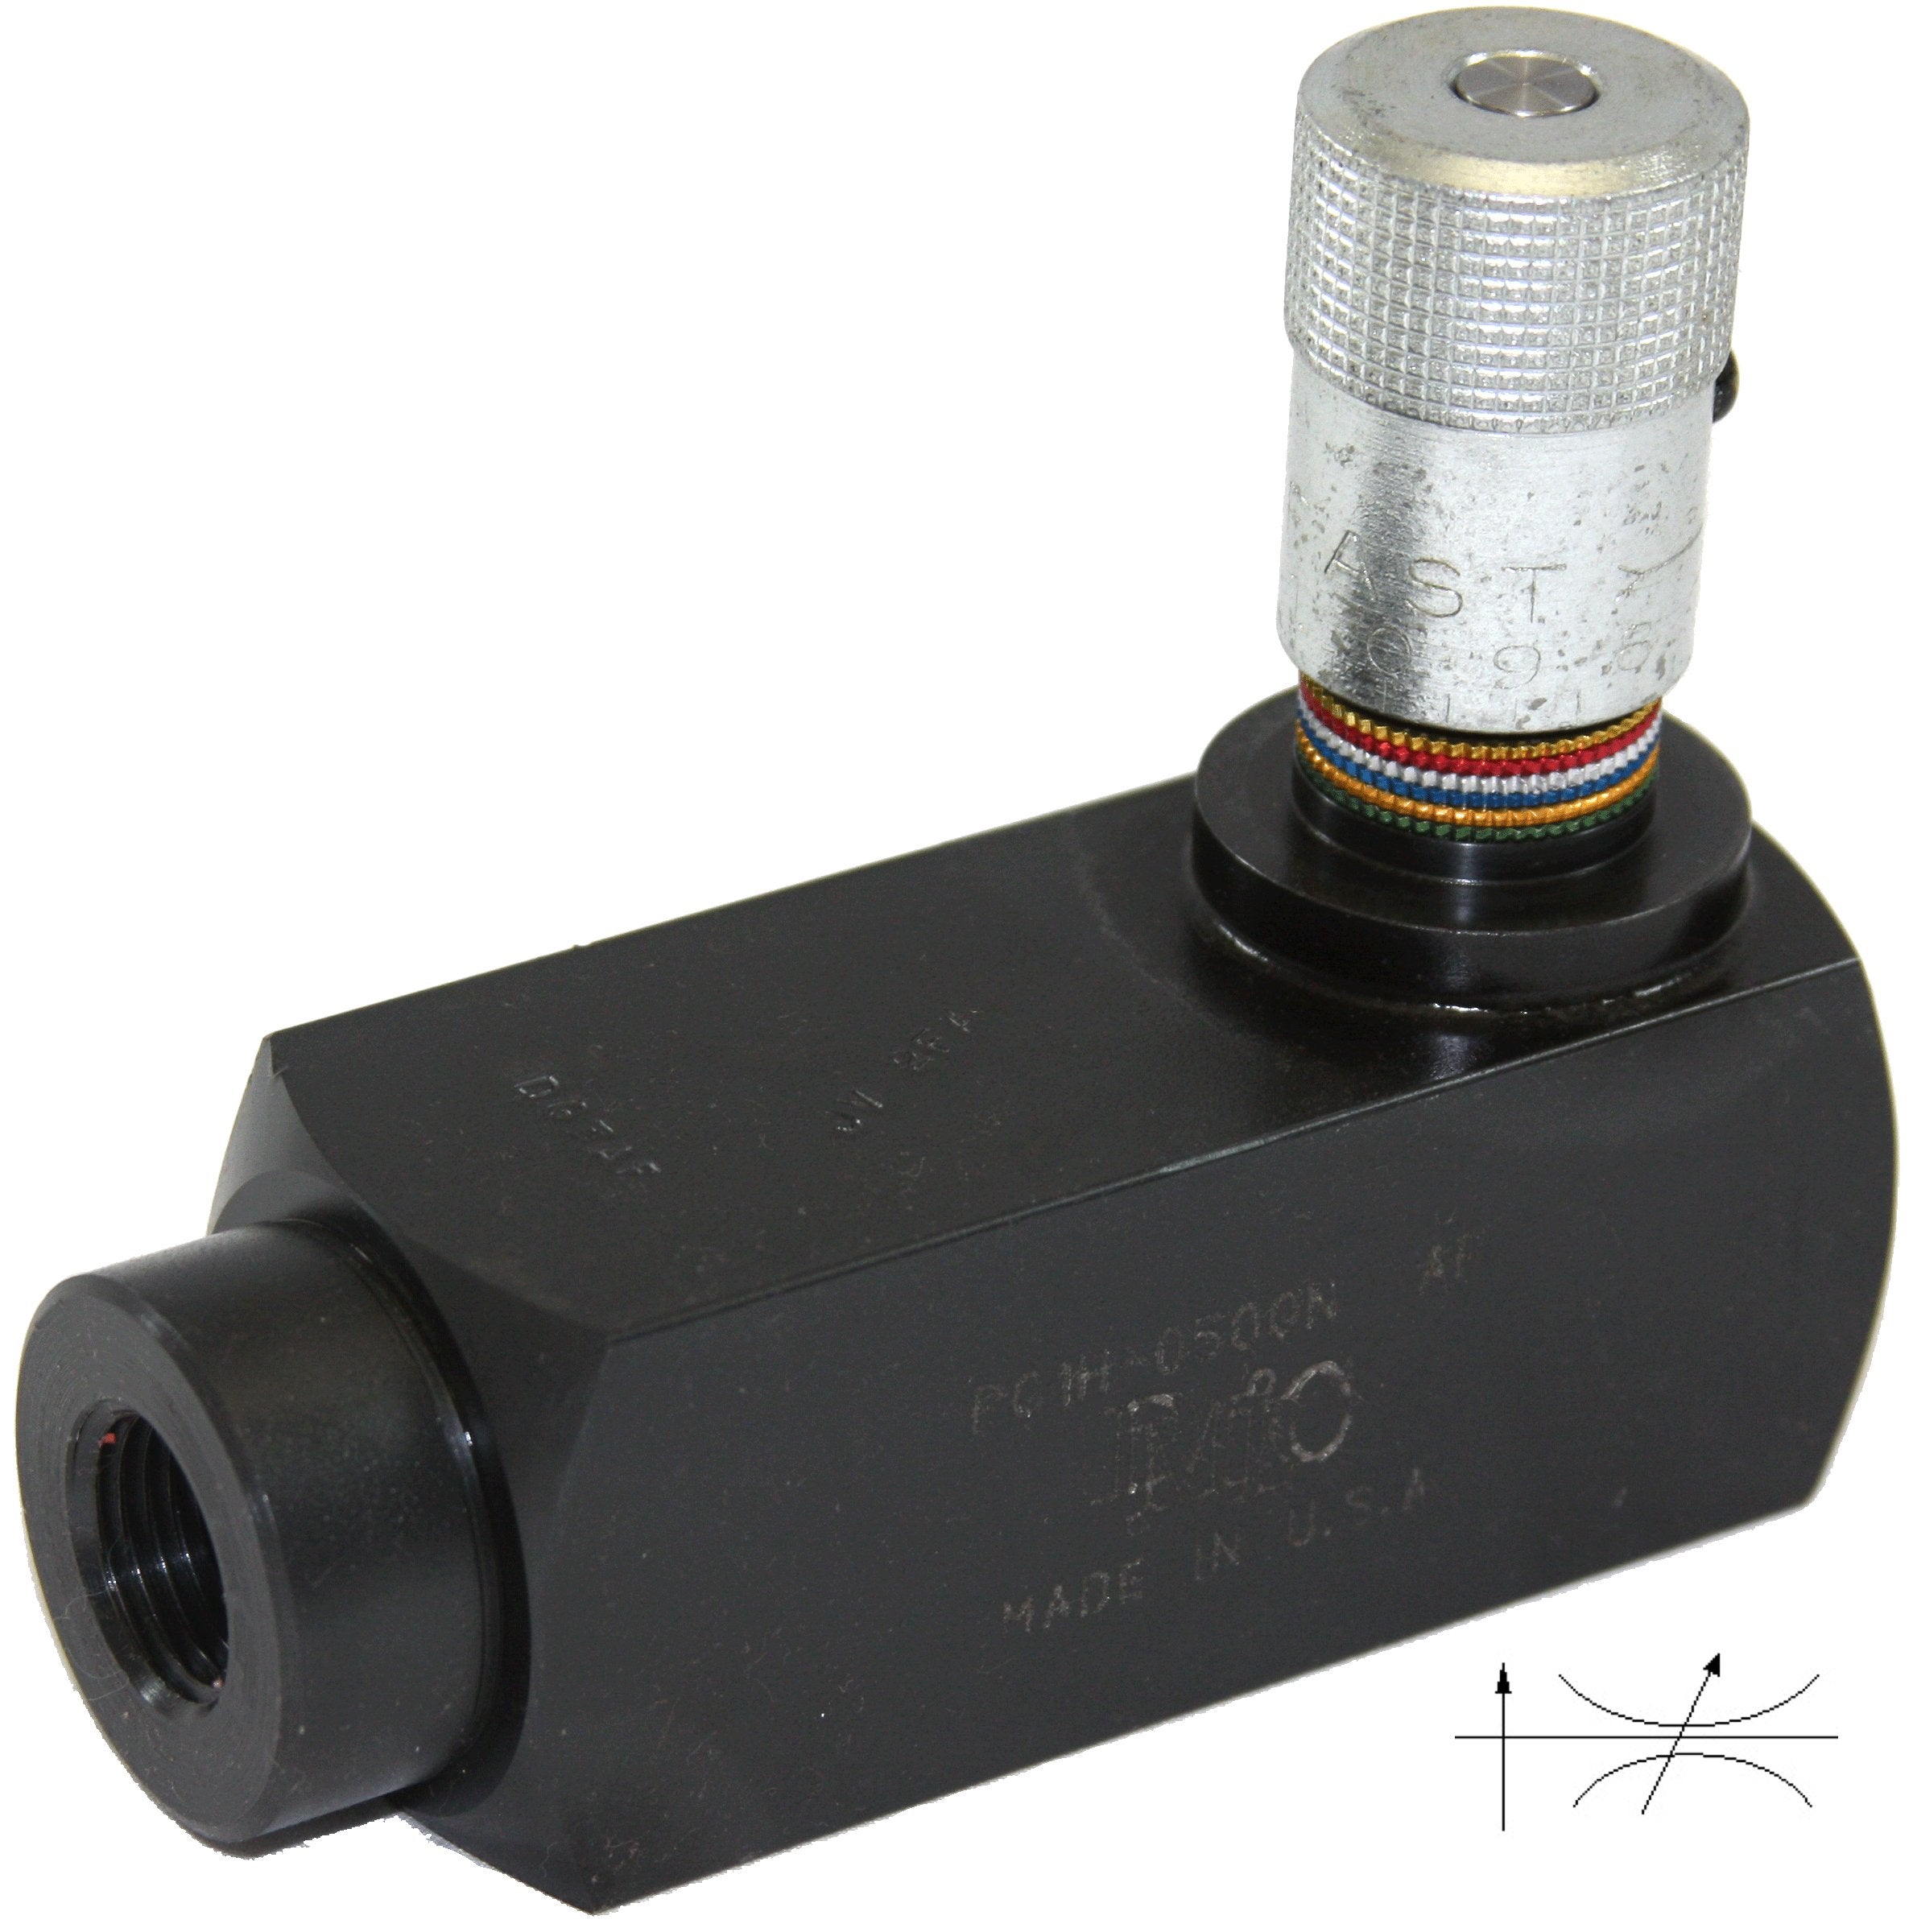 PC1H-0375S : DMIC Pressure Comp Flow Control, Unidirectional, Metered, with Check, #6 SAE (3/8"), 3000psi, Carbon Steel